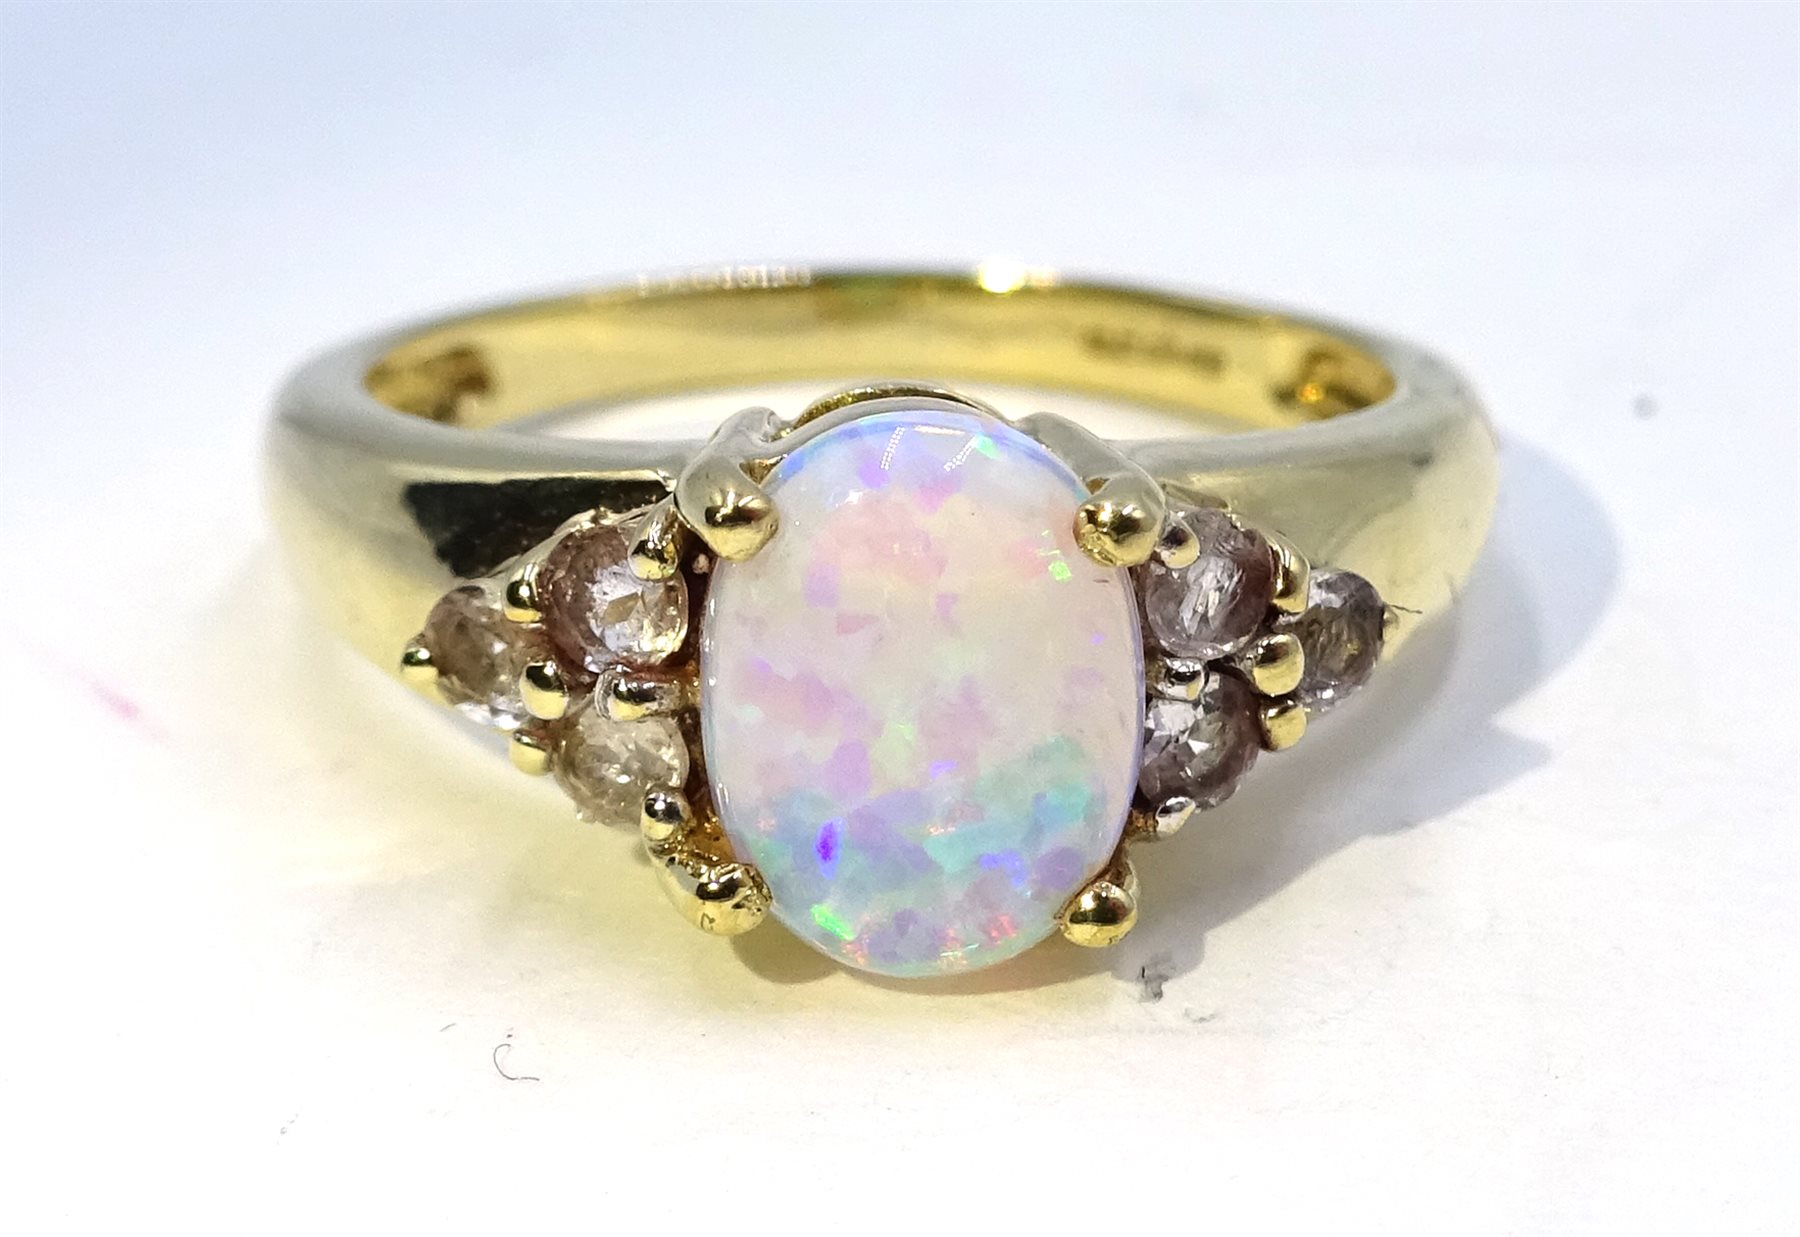 9ct gold opal and white topaz ring, hallmarked - Jewellery, Watches ...